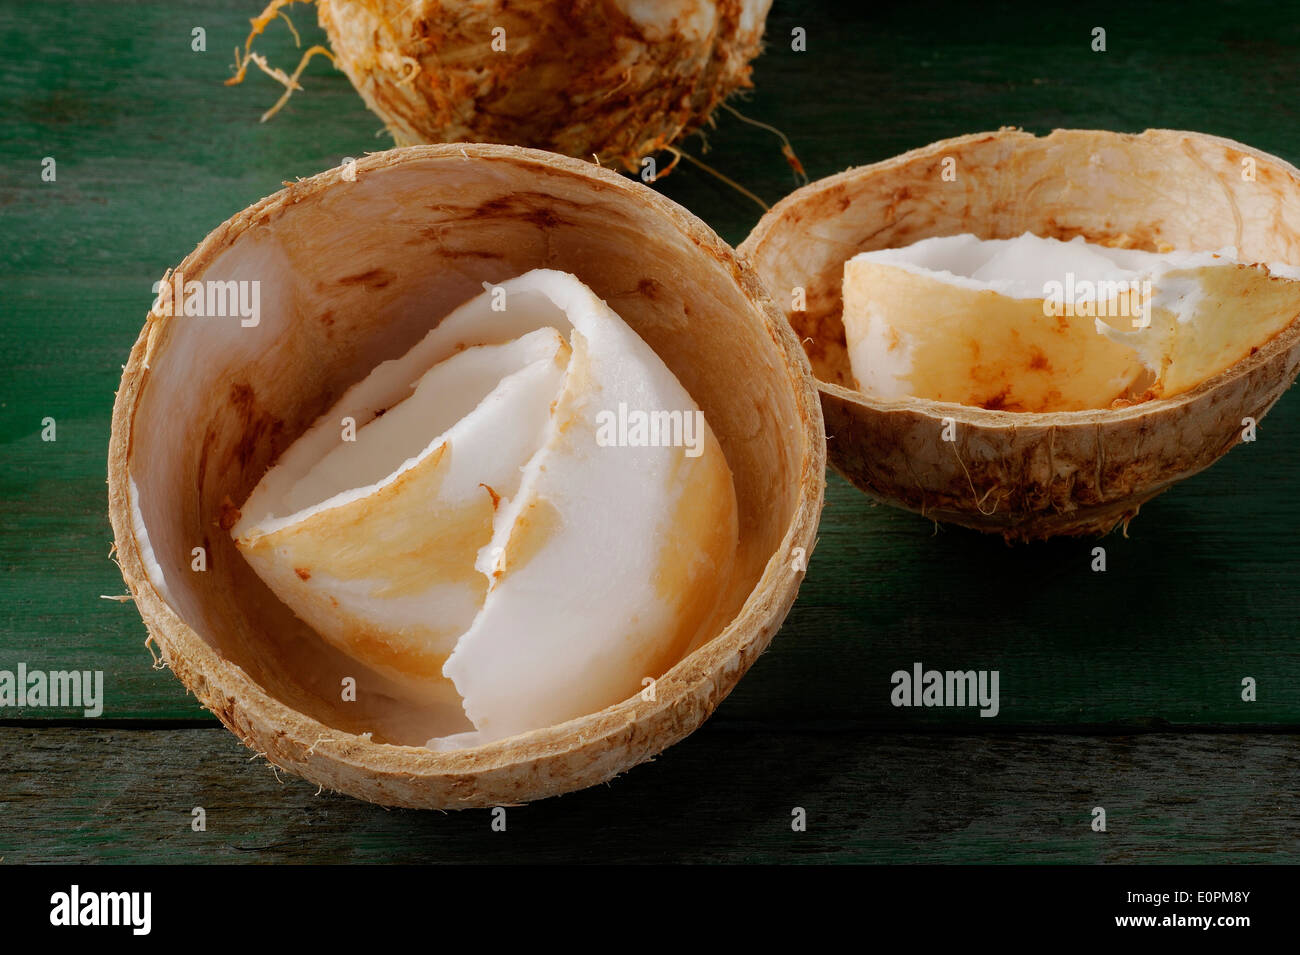 Coconut meat of the fresh young coconut Stock Photo